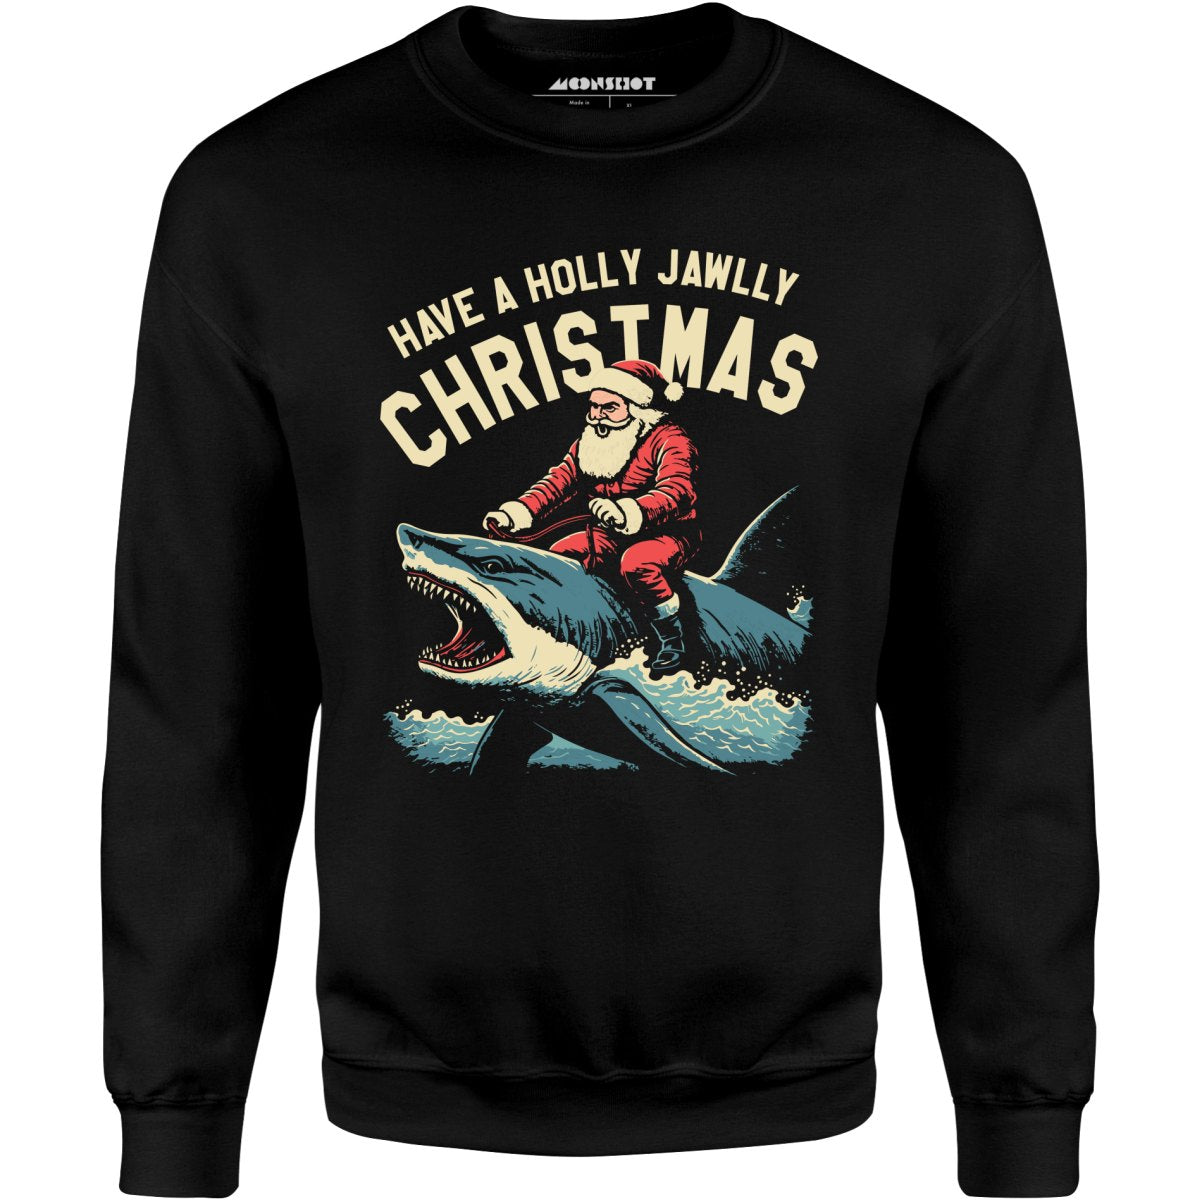 Have a Holly Jawlly Christmas - Unisex Sweatshirt